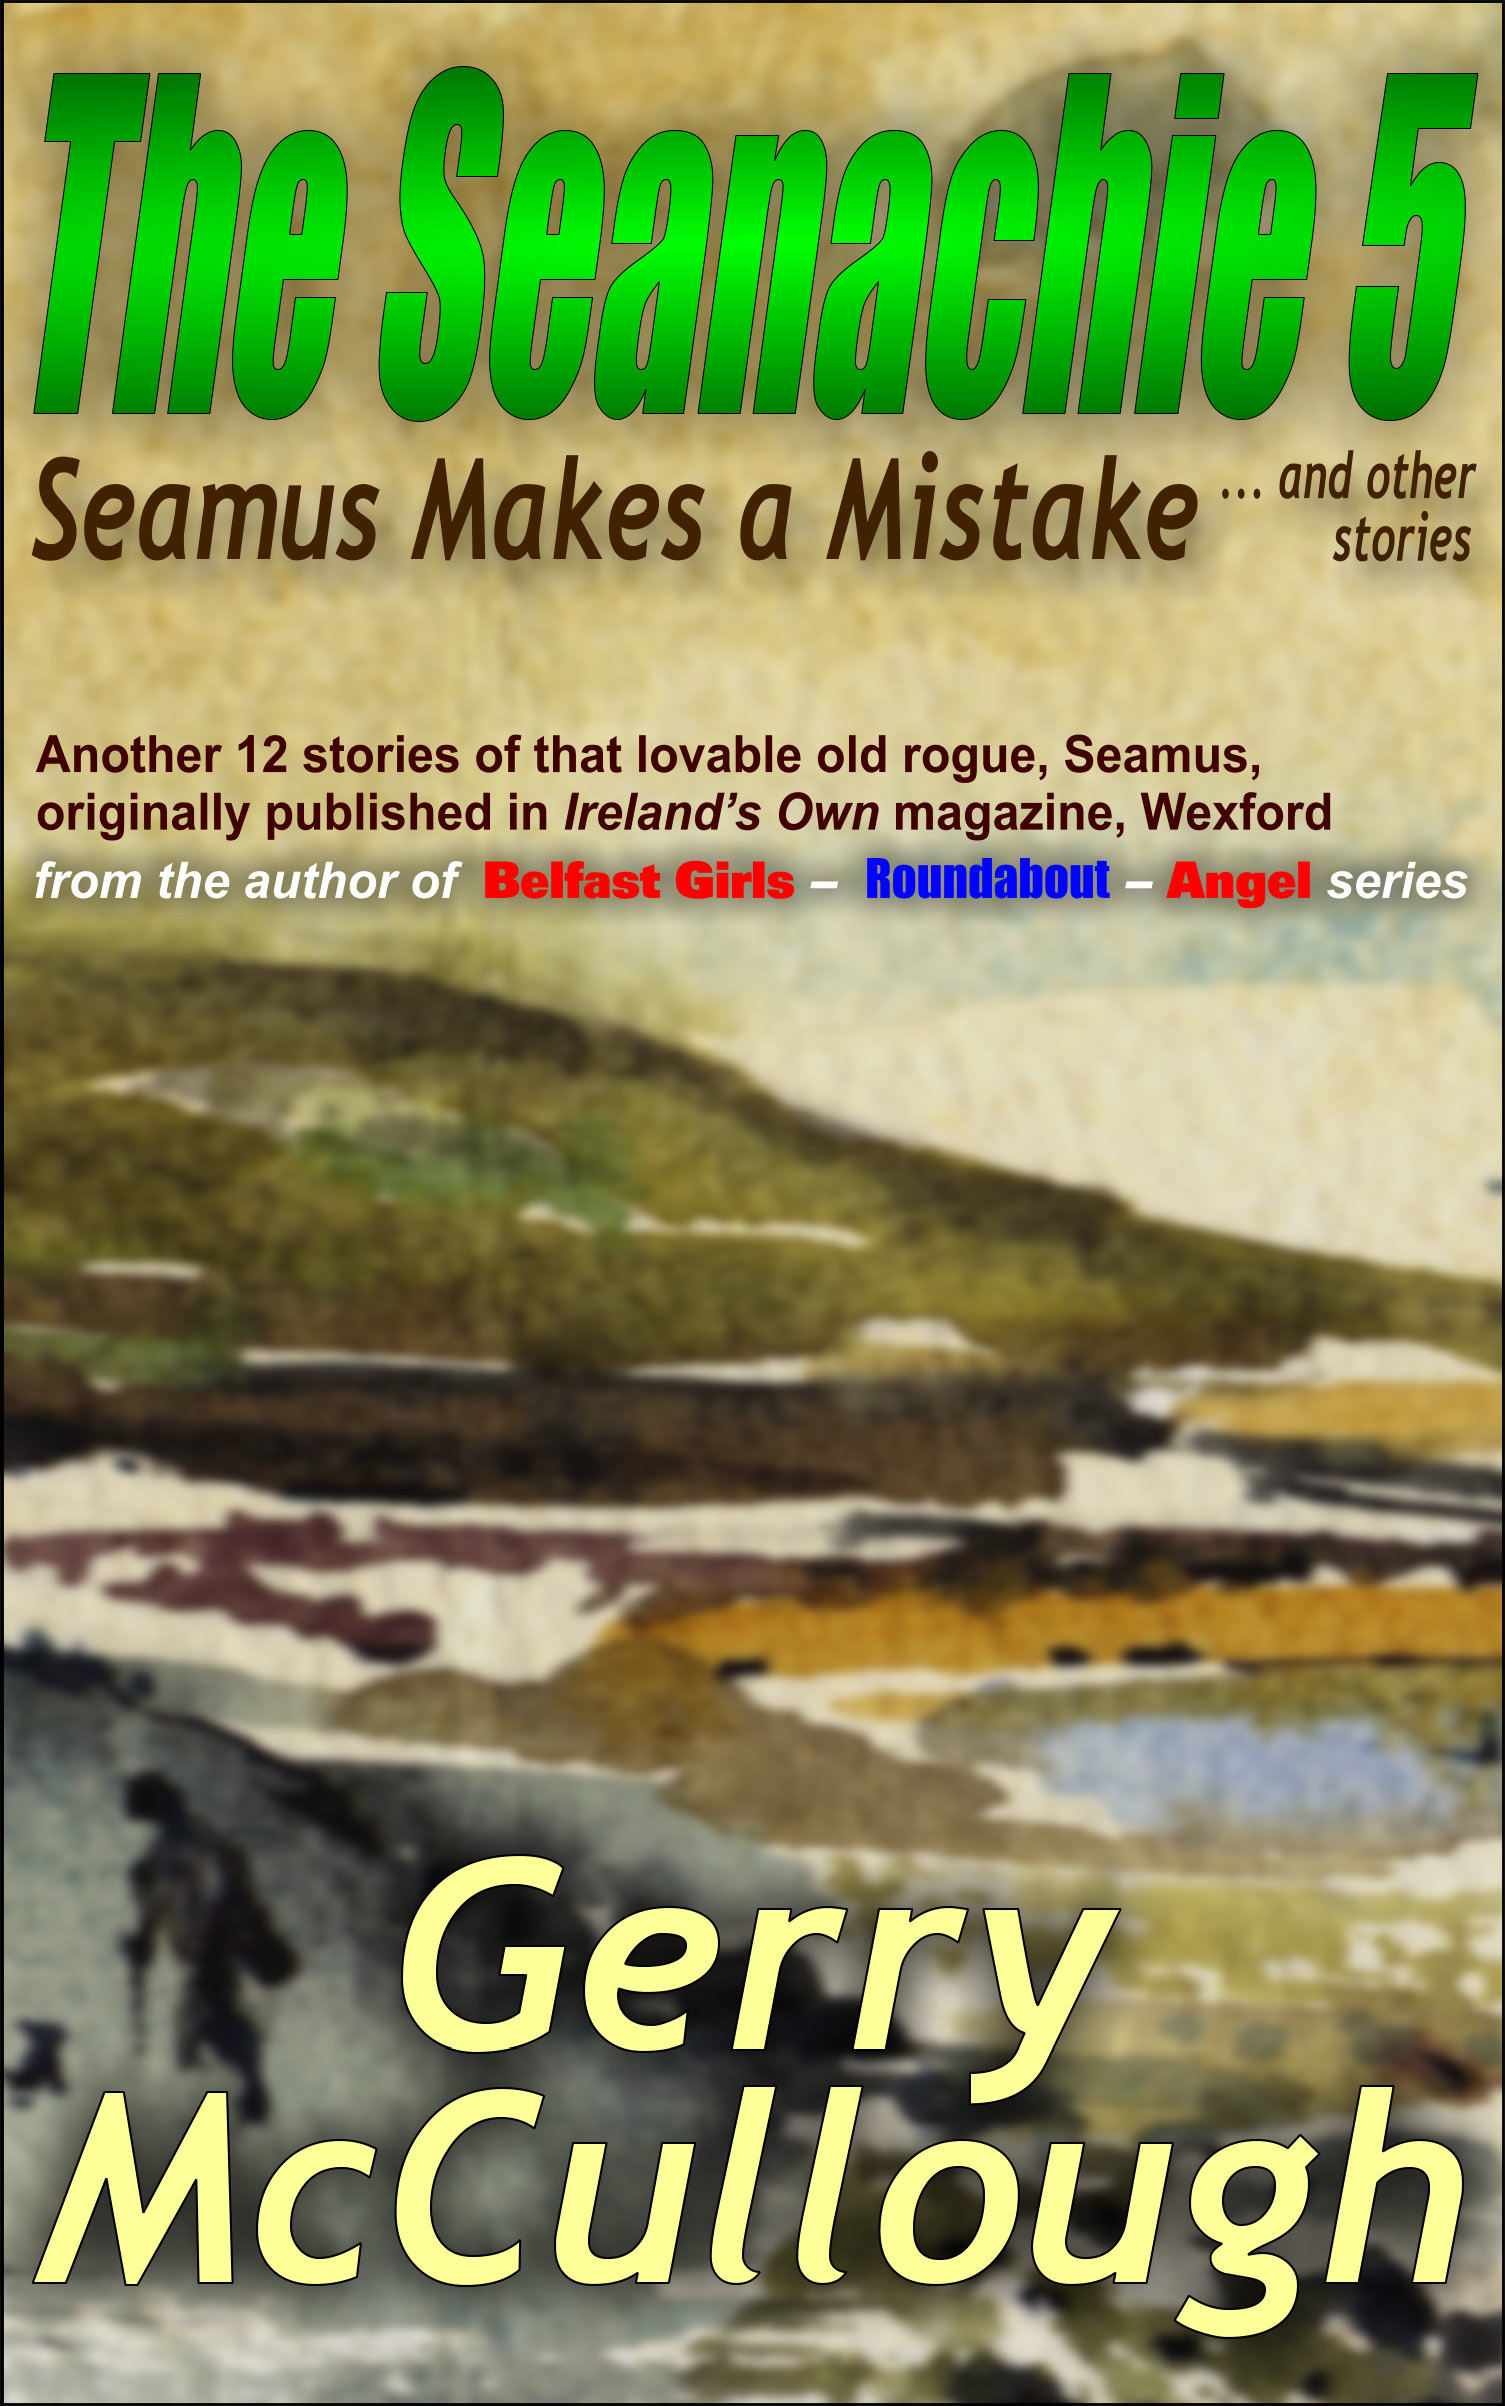 Buy 'The Seanachie 5: Seamus Makes a Mistake and other stories' from Amazon & other outlets